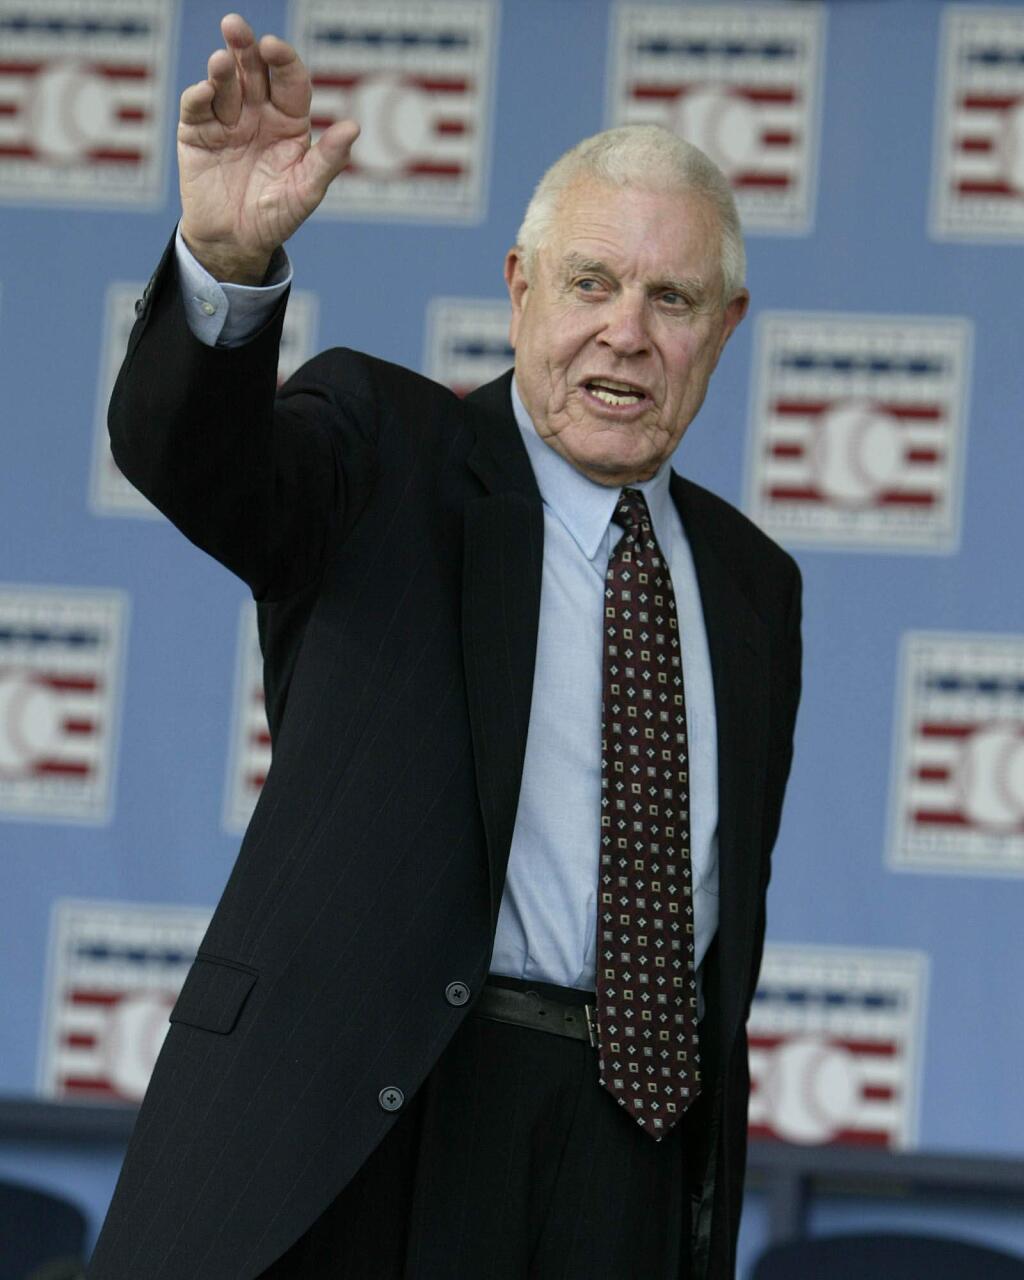 In this July 25, 2004, file photo, broadcaster Lon Simmons, the longtime voice of baseball in the San Francisco Bay area, waves at the end of the 2004 National Baseball Hall of Fame induction ceremonies in Cooperstown, N.Y. The Giants announced that Simmons had died Sunday, April 5, 2015. He was 91. (AP Photo/John Dunn, File)